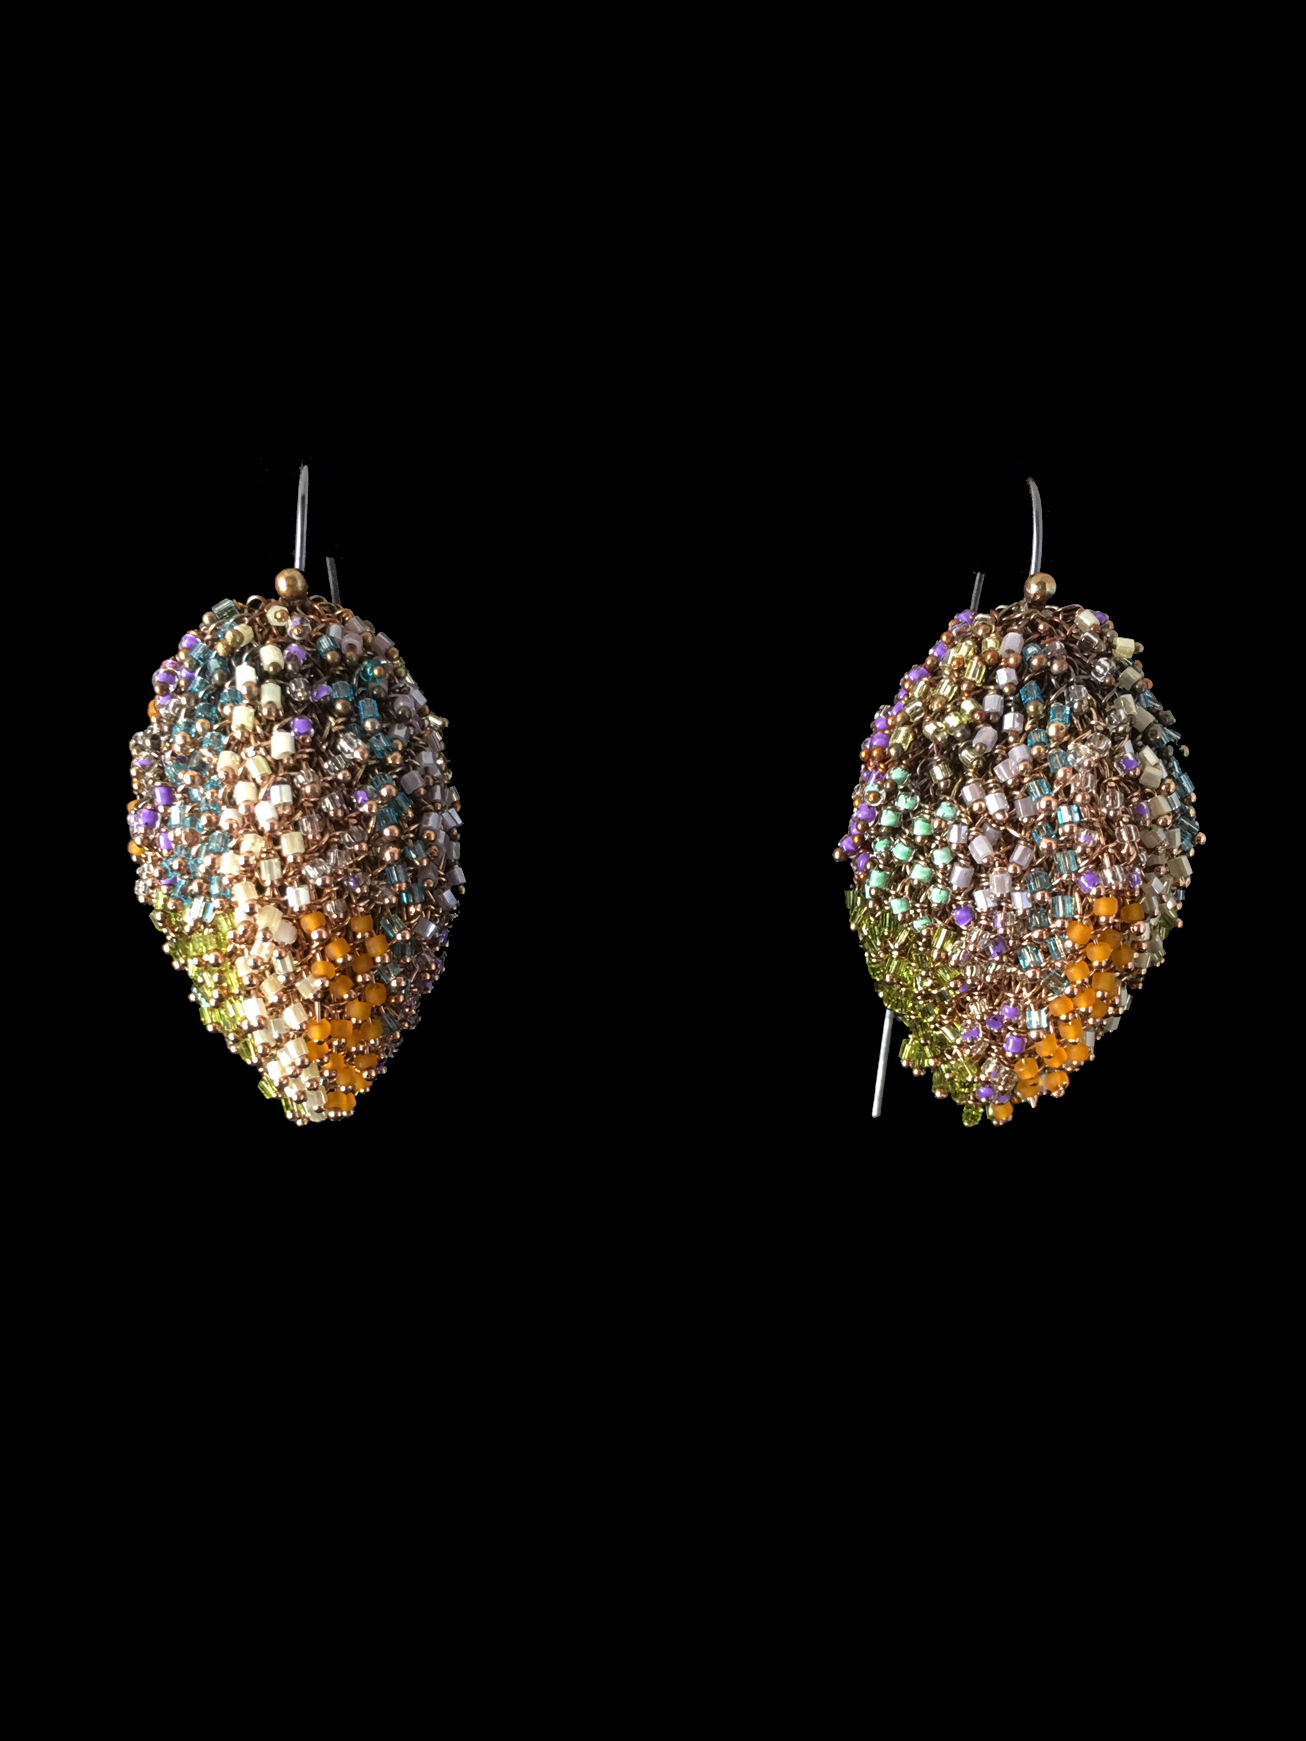 Woven Earrings with Multi-Color Swarovski Crystals (13AUR)